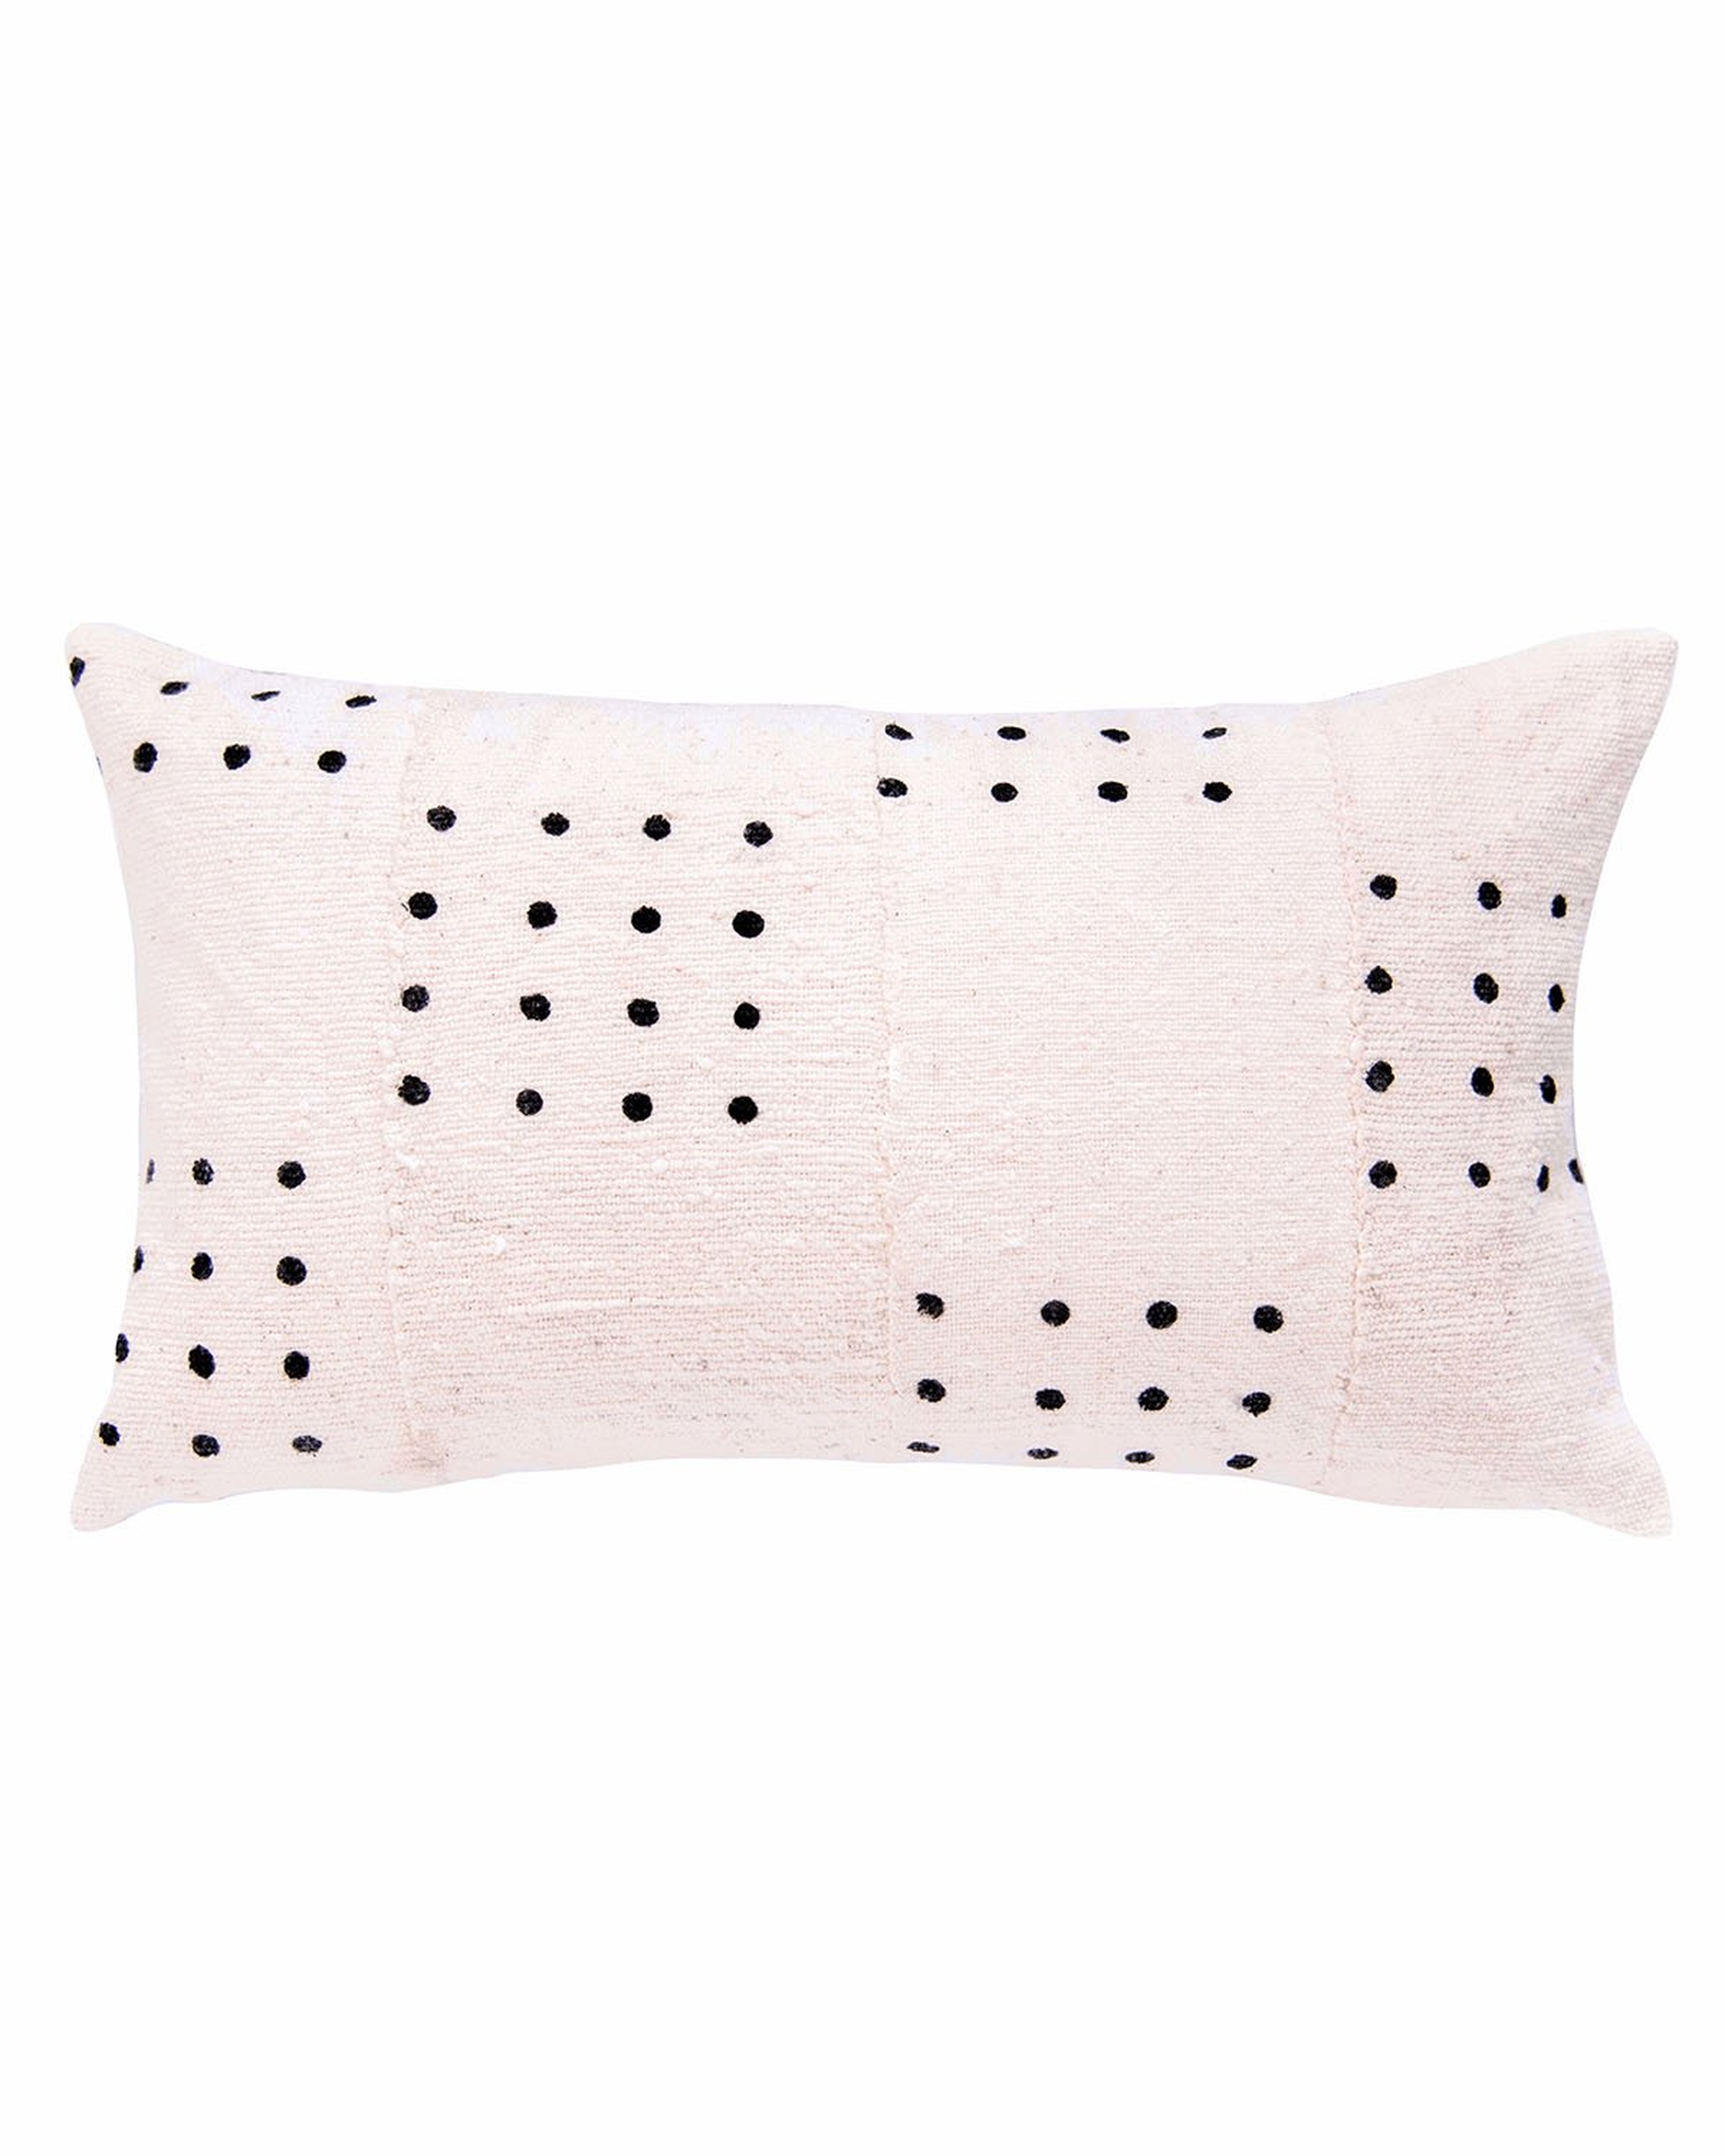 dotted mud cloth lumbar pillow in white - with insert - PillowPia